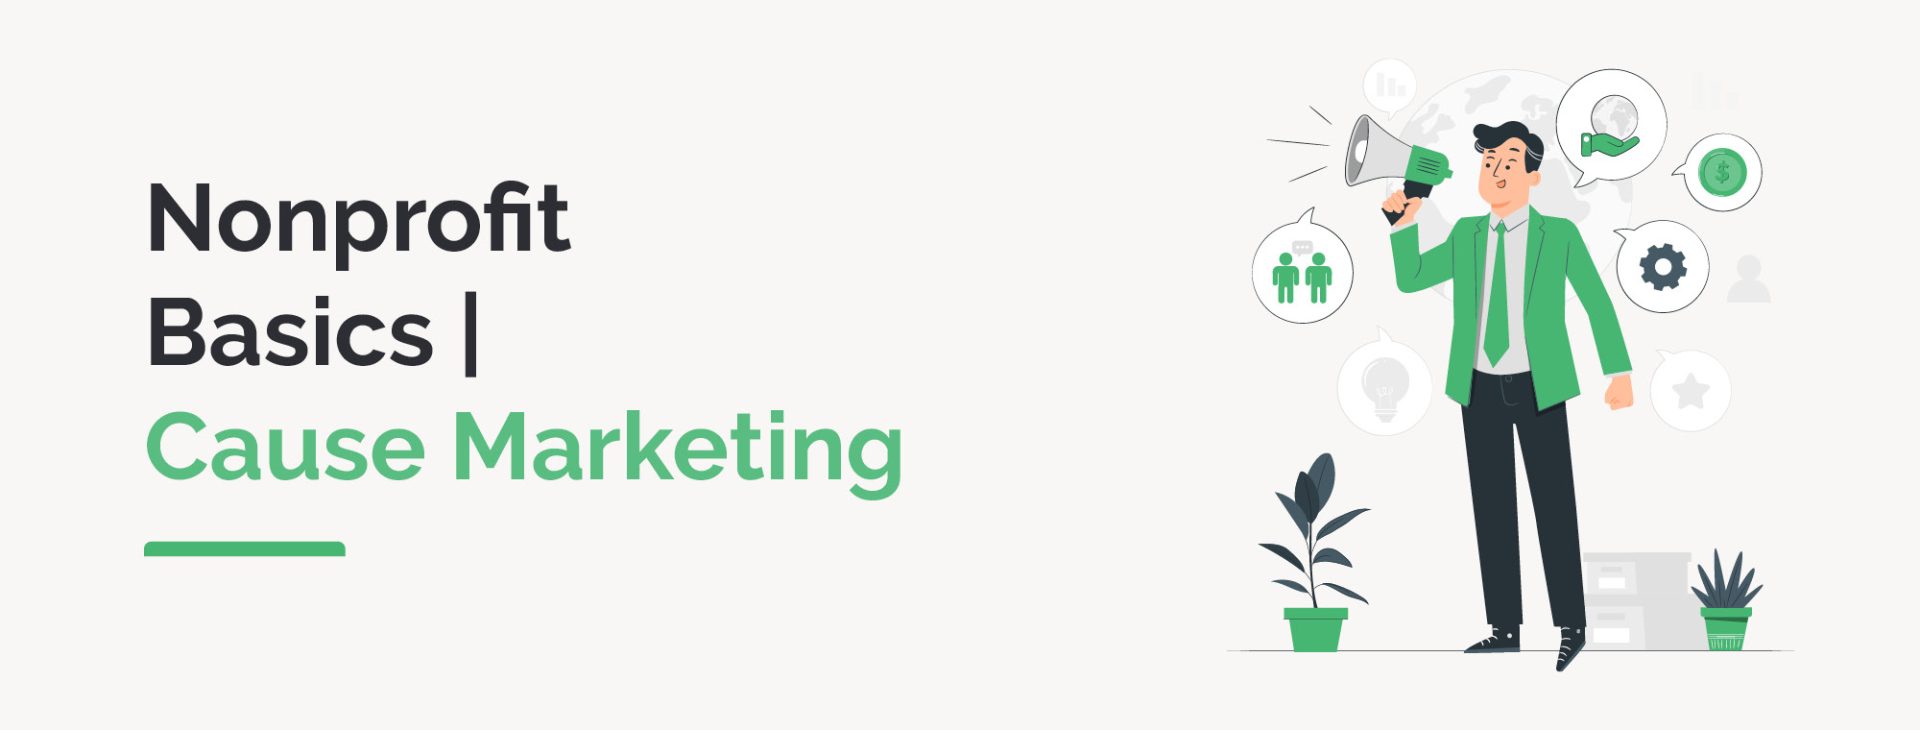 This guide explores the basics of cause marketing.